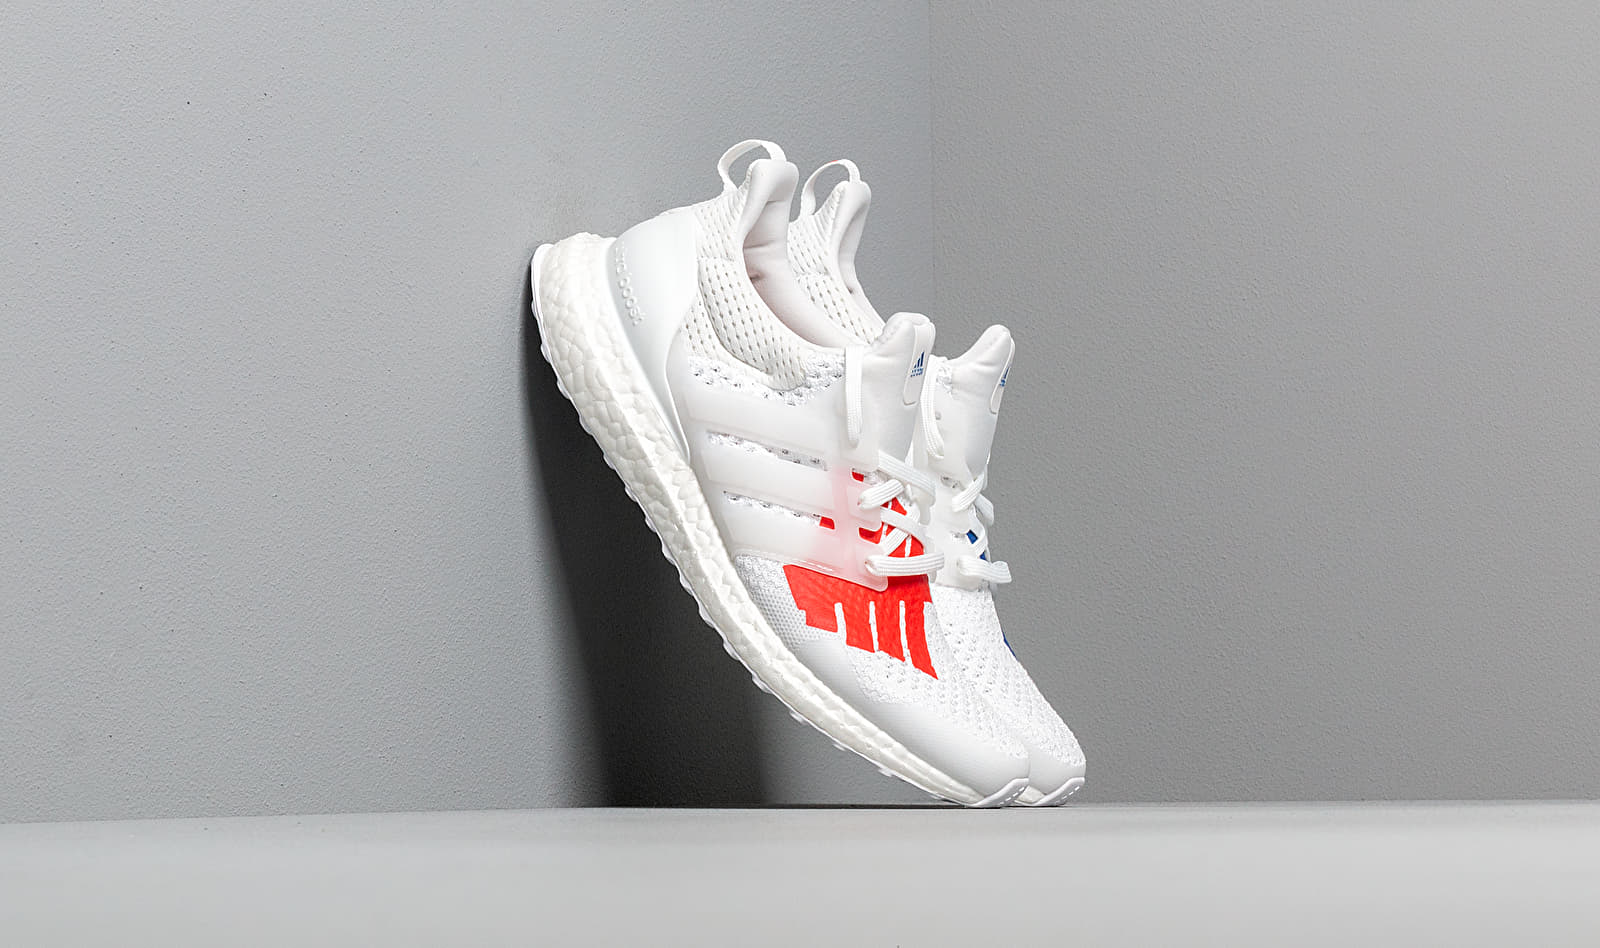 adidas x Undefeated Ultraboost Core White/ Scarlet/ Core White EF1968